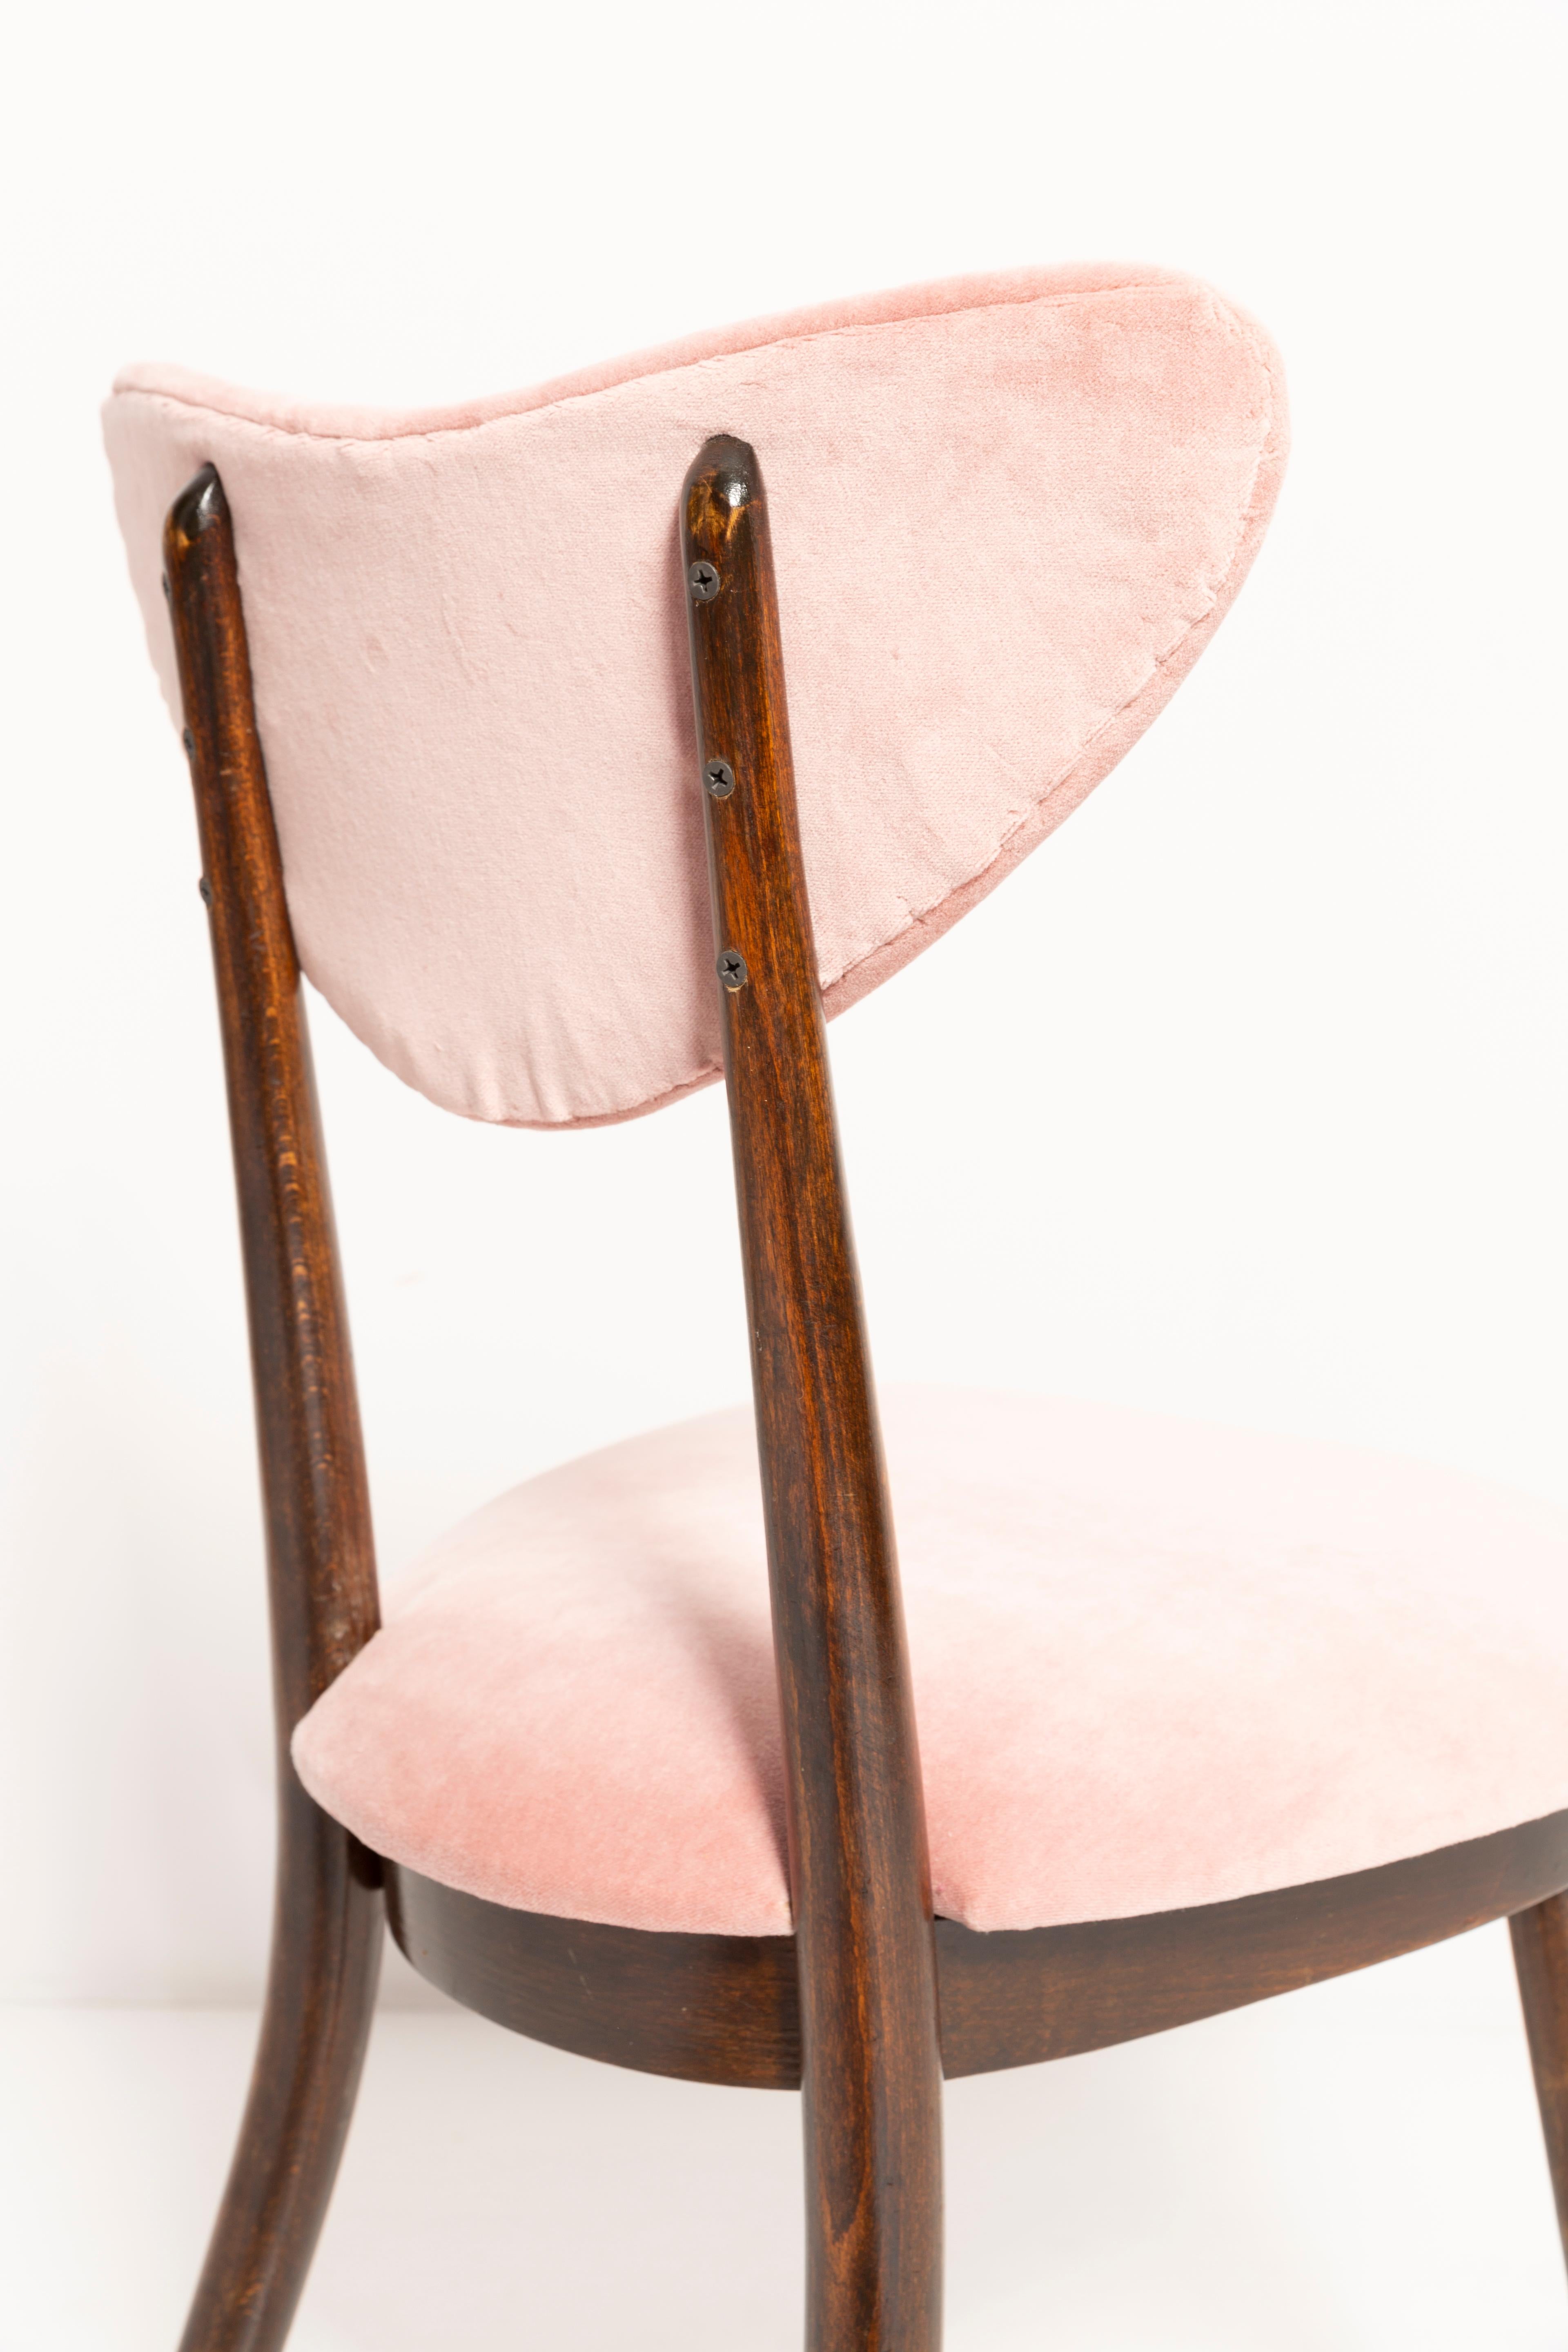 Hand-Crafted Mid Century Pink Heart Cotton-Velvet Chair, Europe, 1960s For Sale